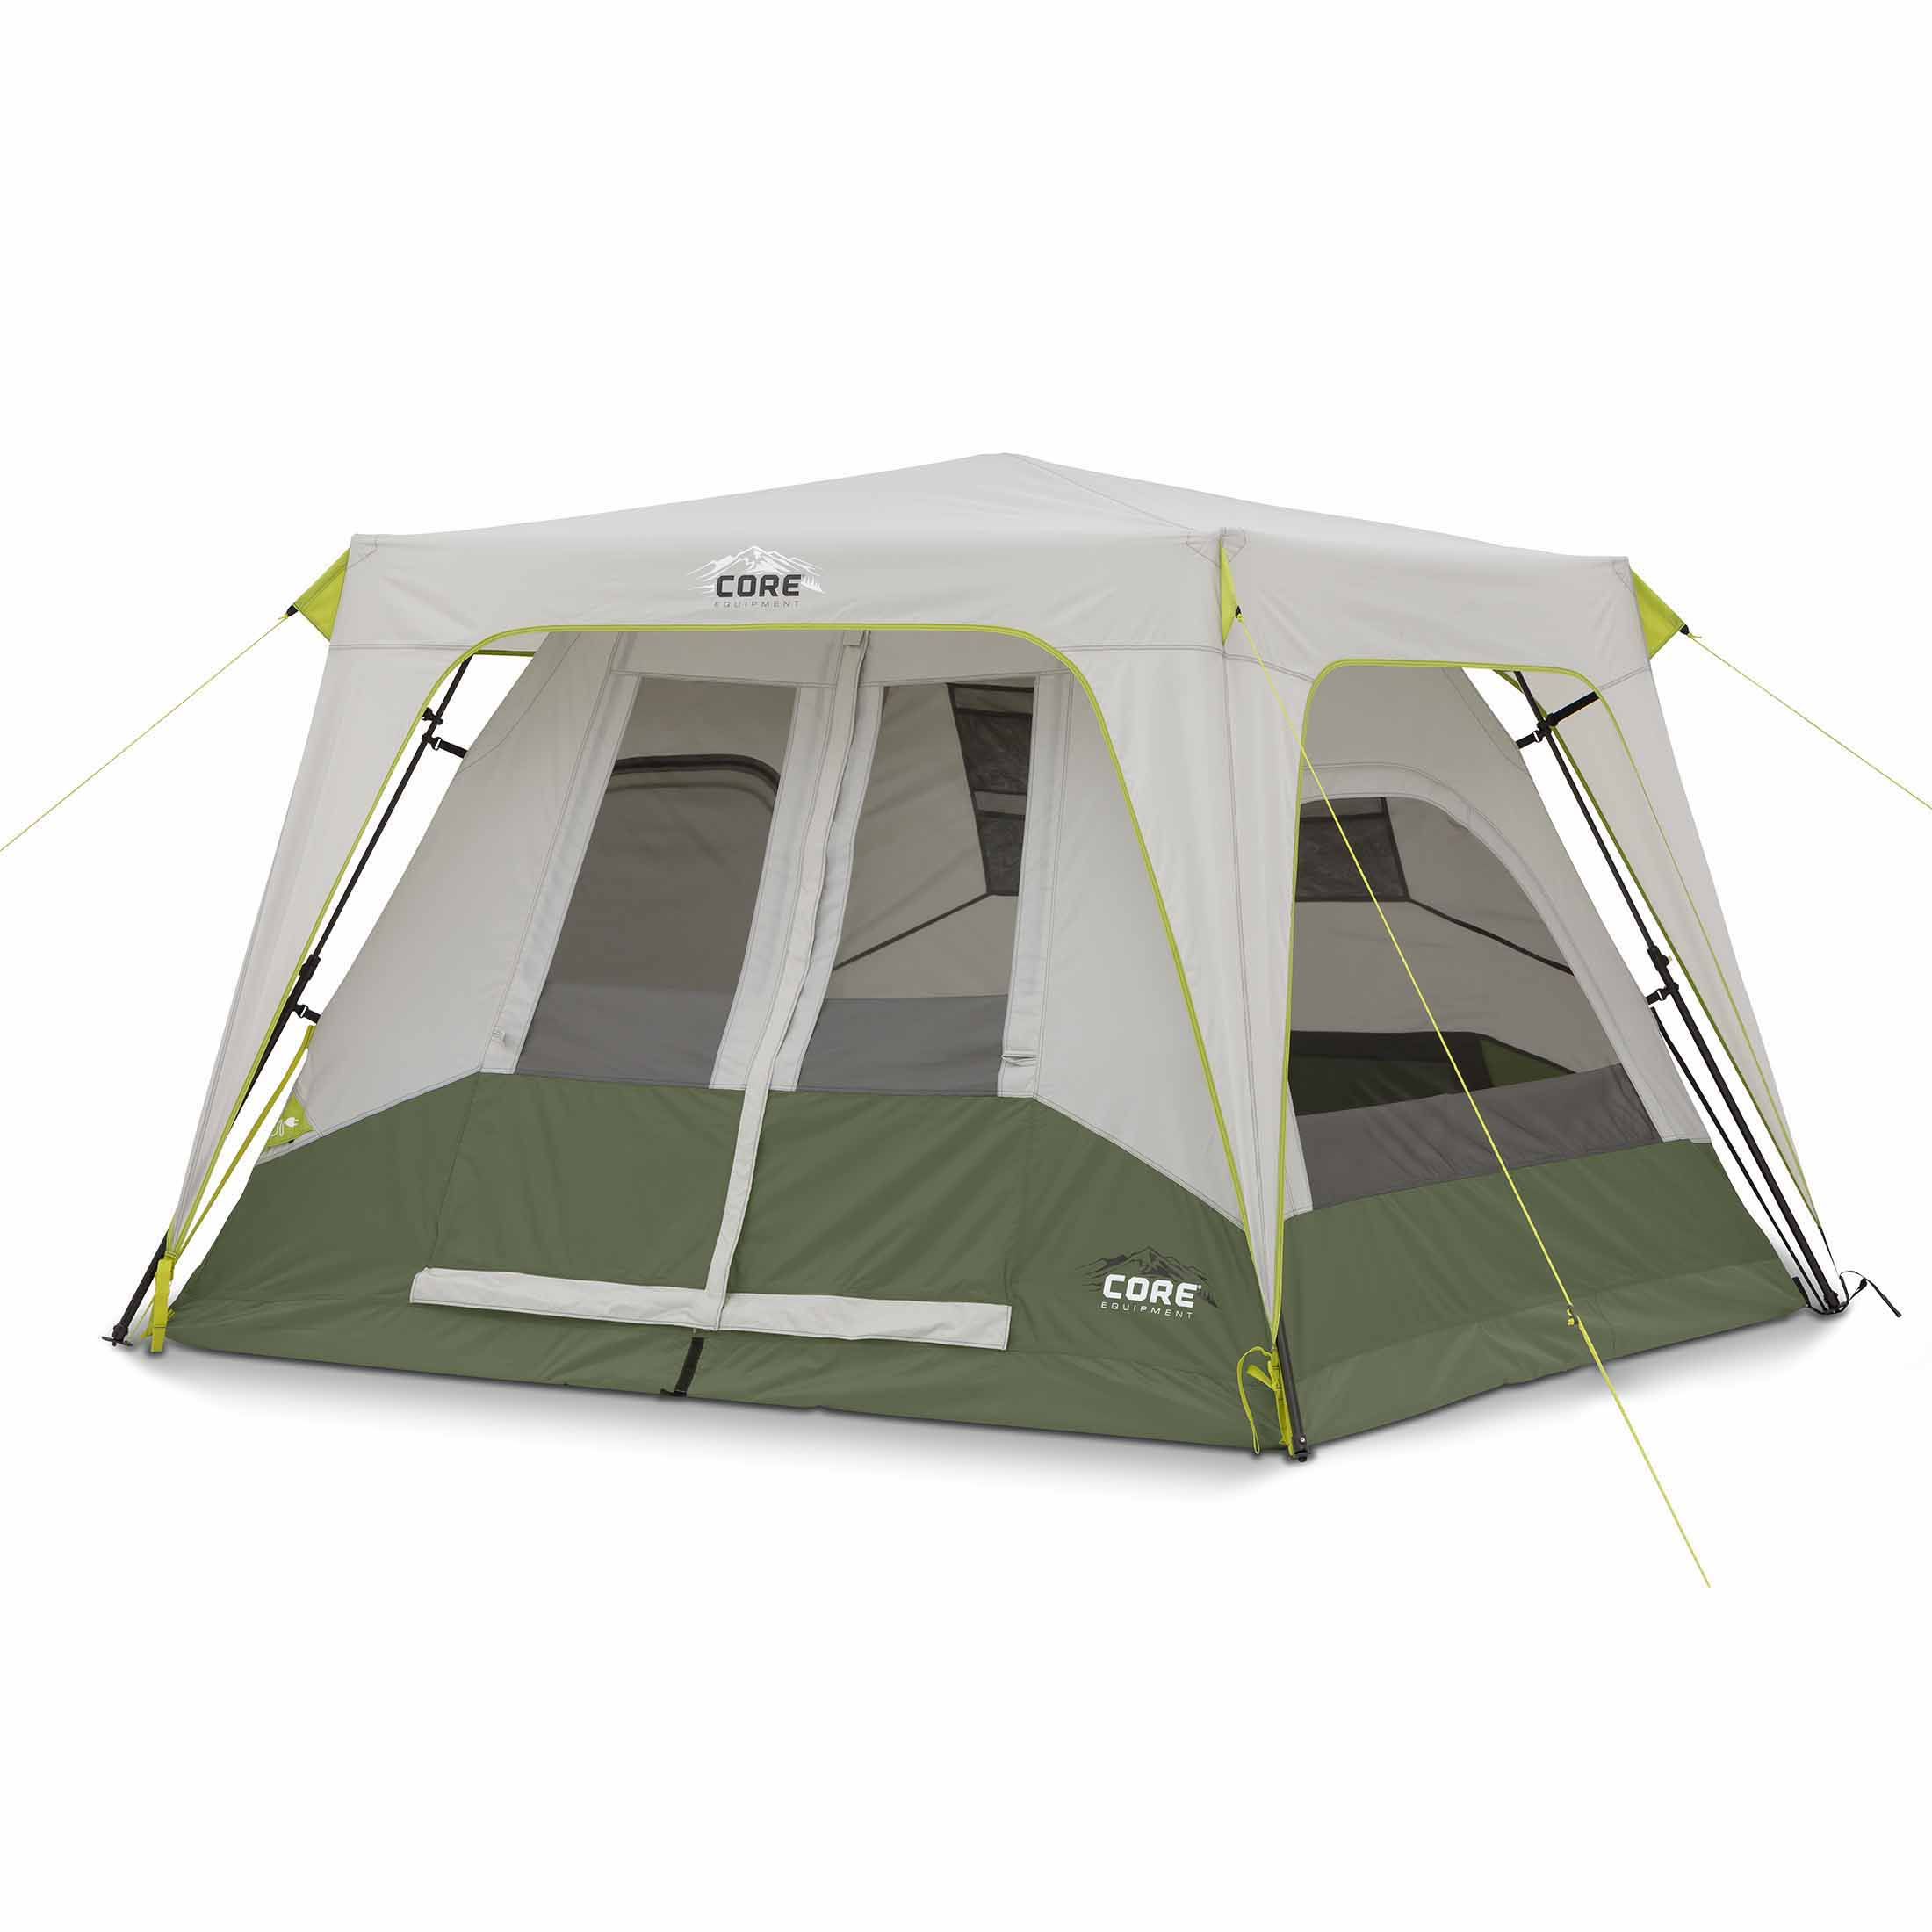 Core Equipment 4-Person Instant Cabin Performance Tent